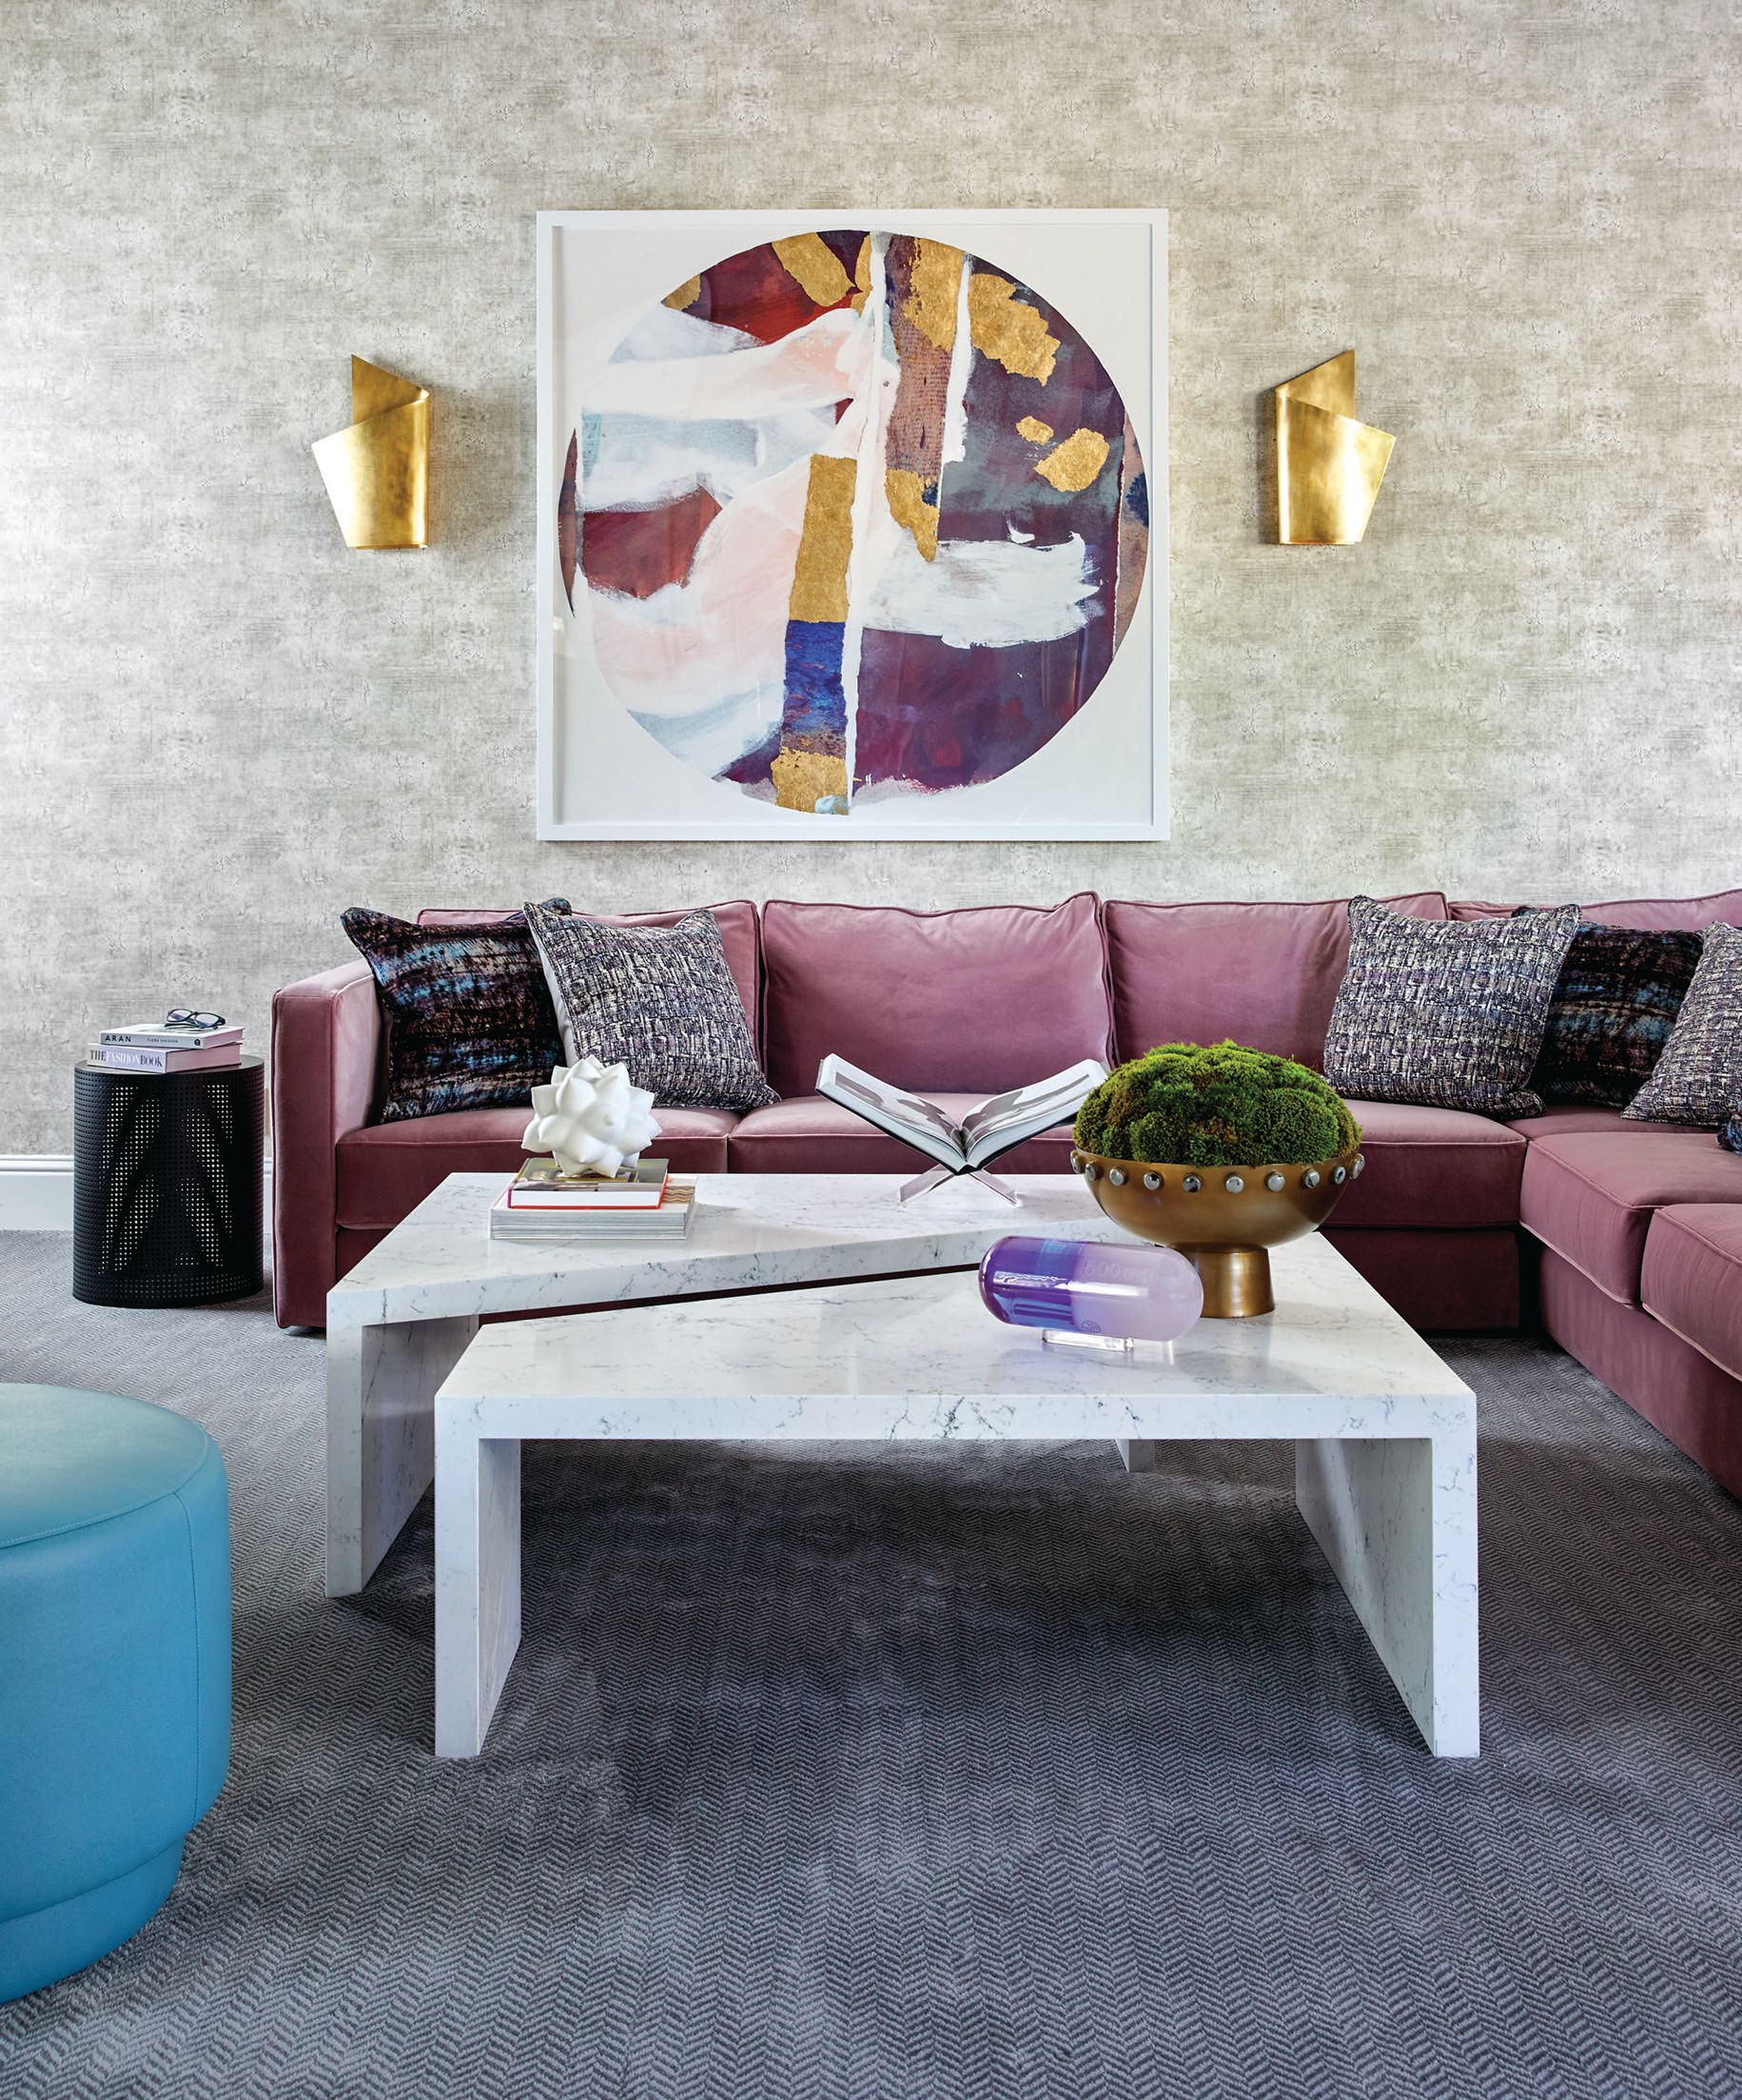 A two-tiered quartz table by Britany Simon Design House pairs nicely with a bold mauve velvet custom sectional. Wallpaper by Thibaut adds subtle texture to the walls and accents the oversize art piece by Zoe Bios Creative. The perforated metal side table from Noir adds some edge to the room. Photographed by Laura Moss